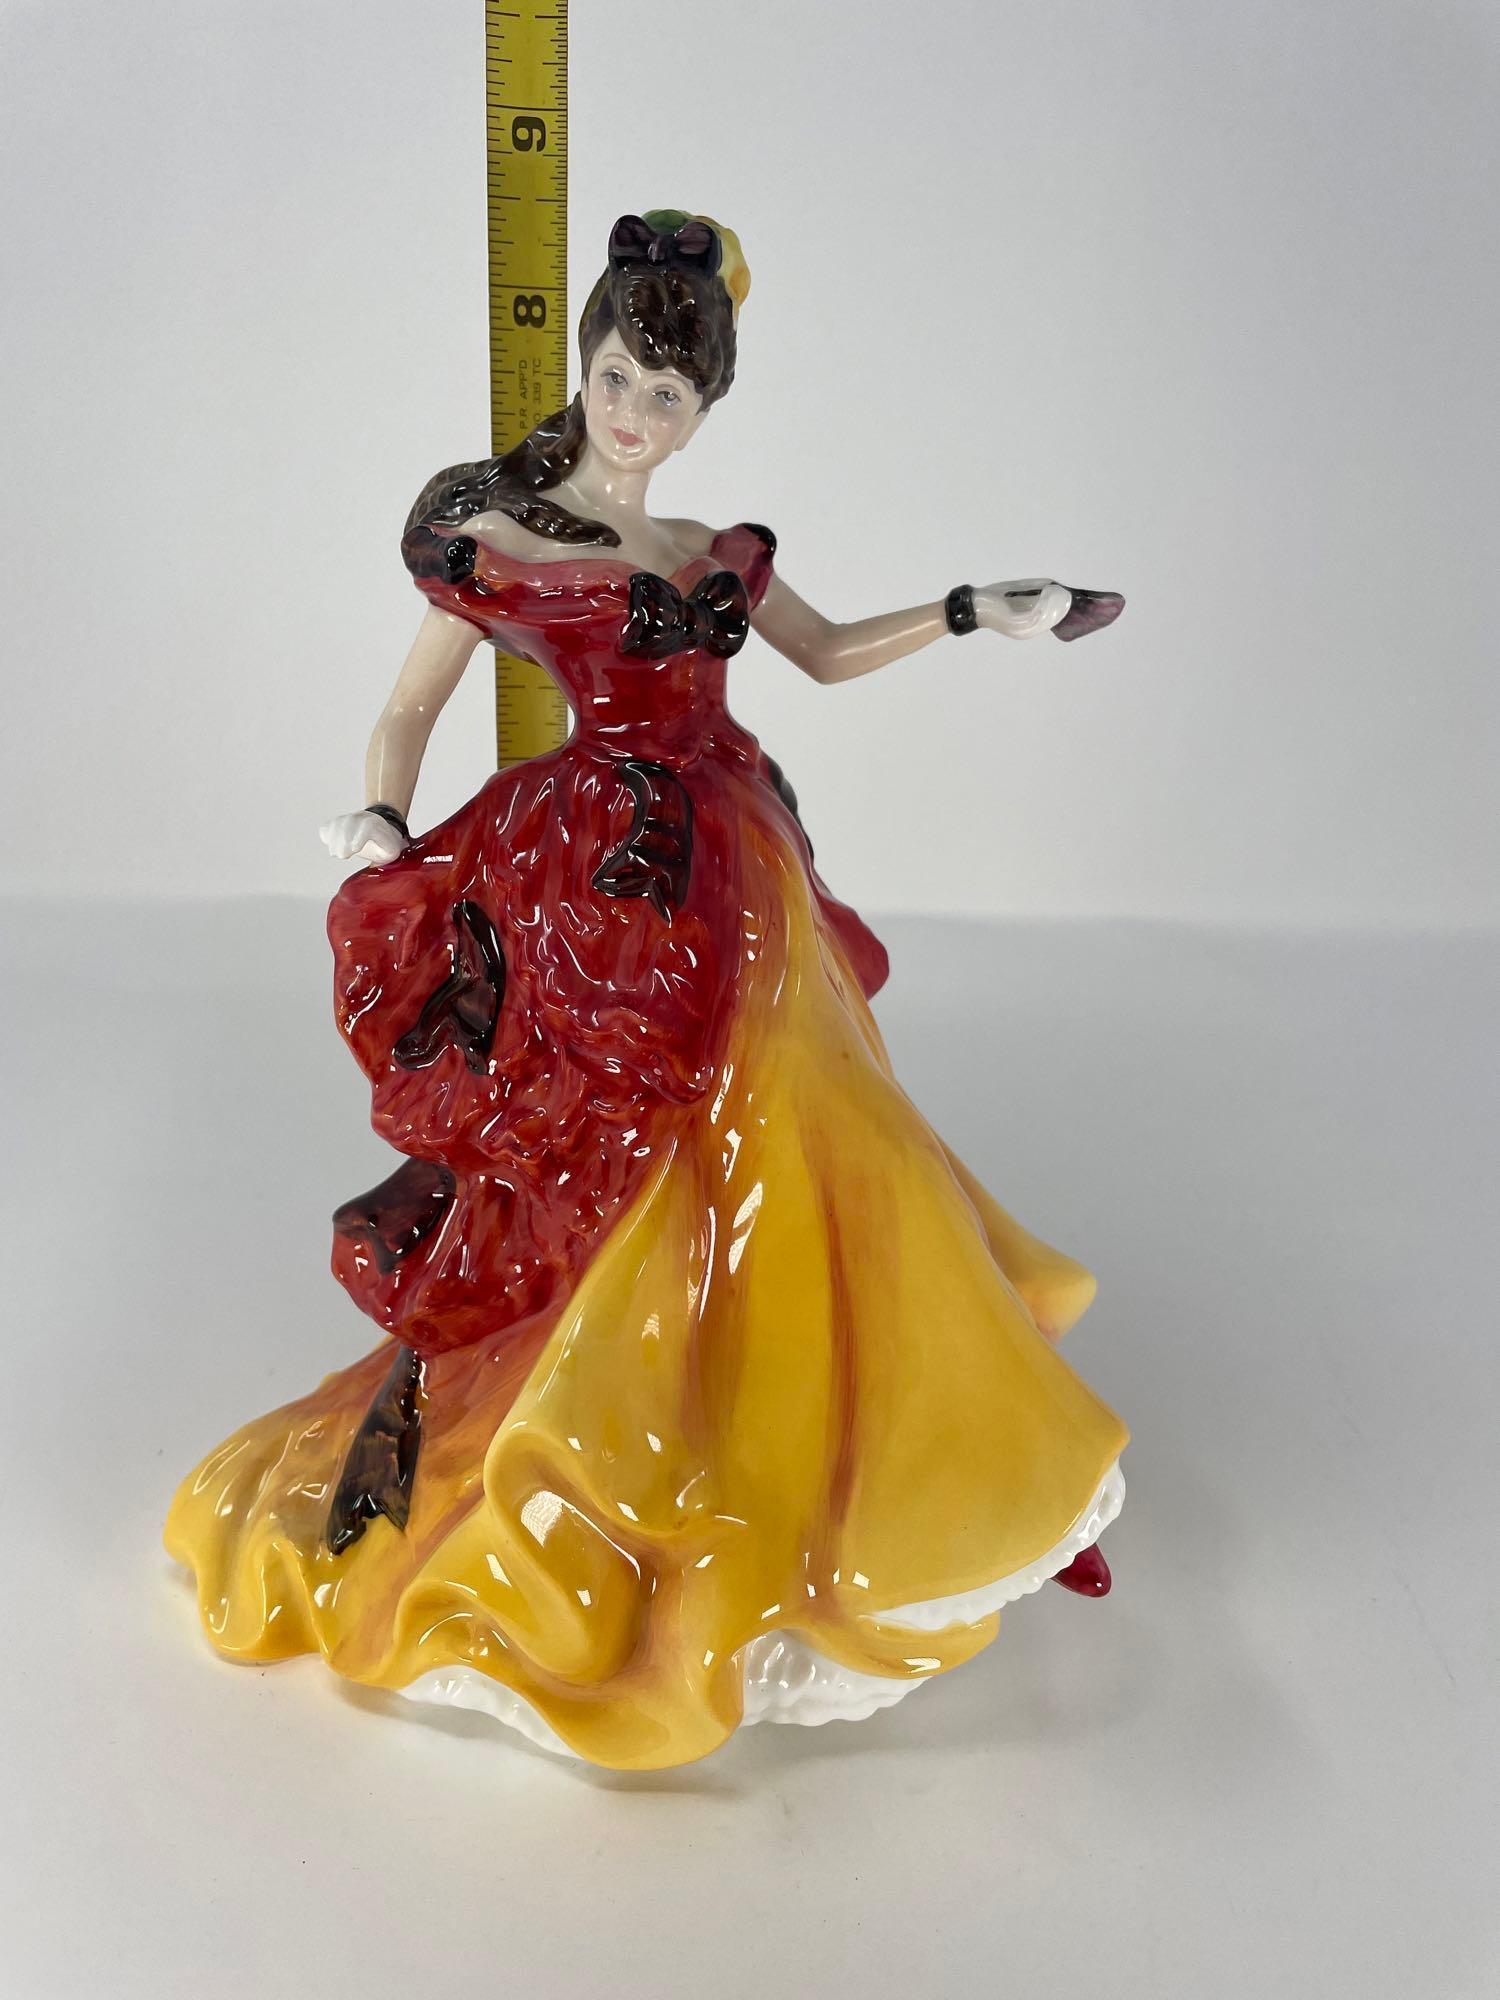 1996 Royal Doulton Figure of the Year "Belle" HN 3703